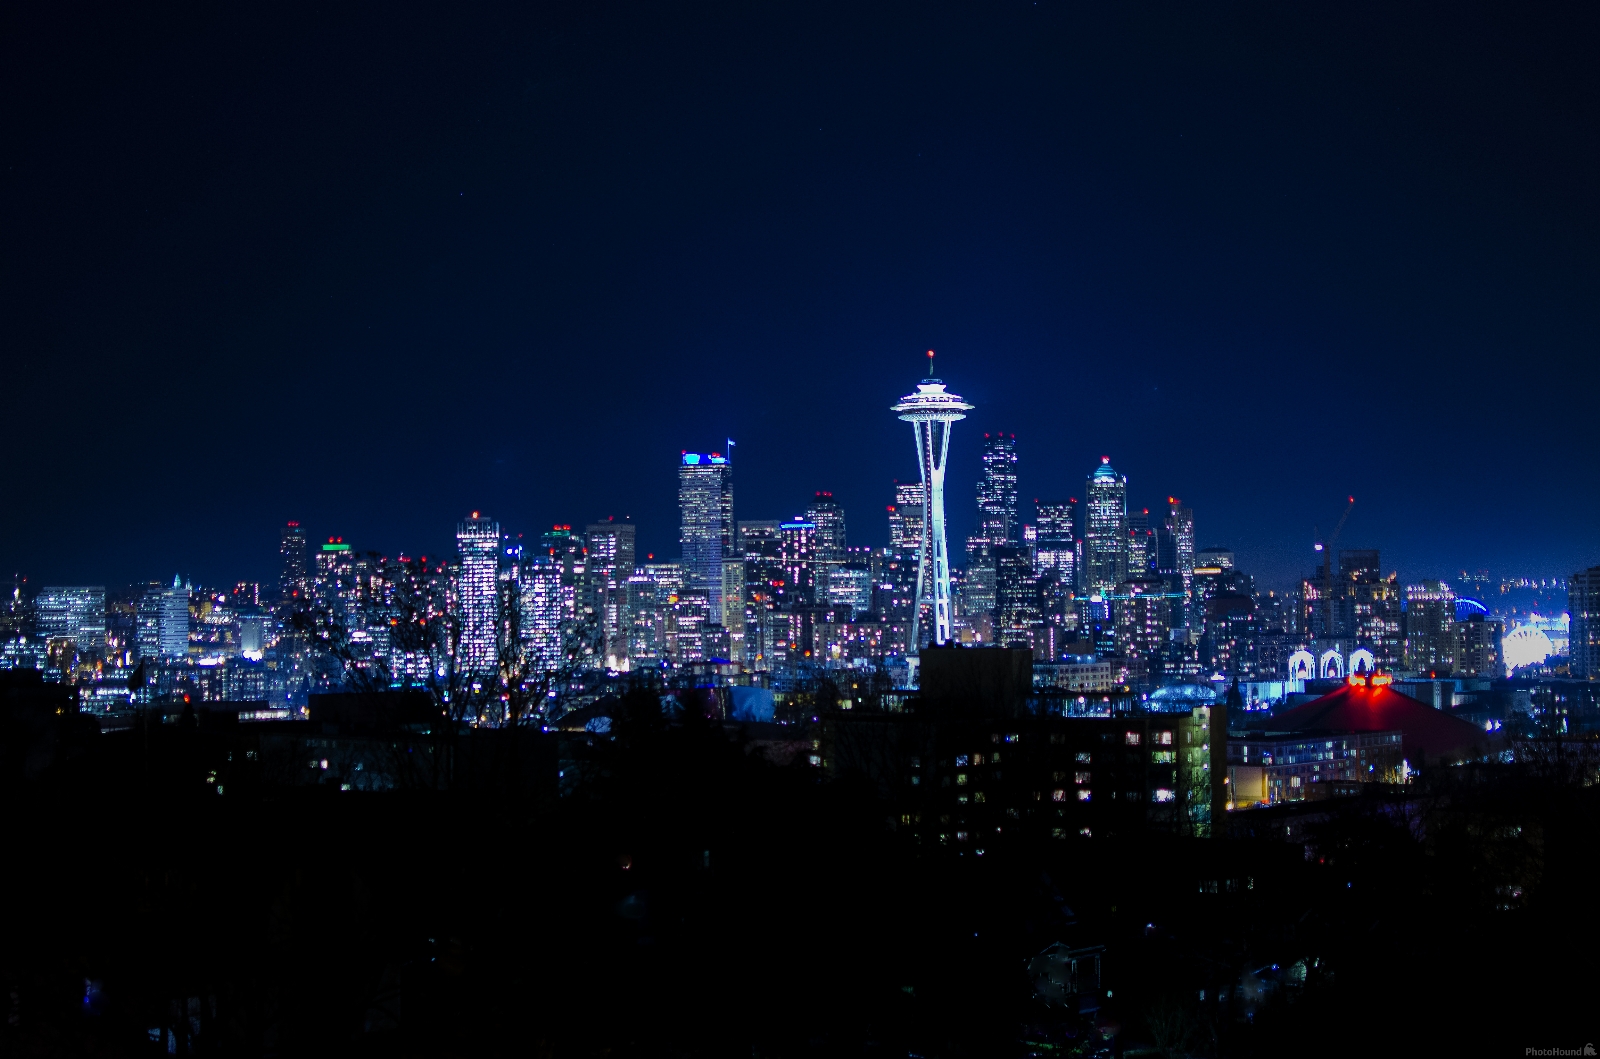 Image of Kerry Park by Enrico Pozzo